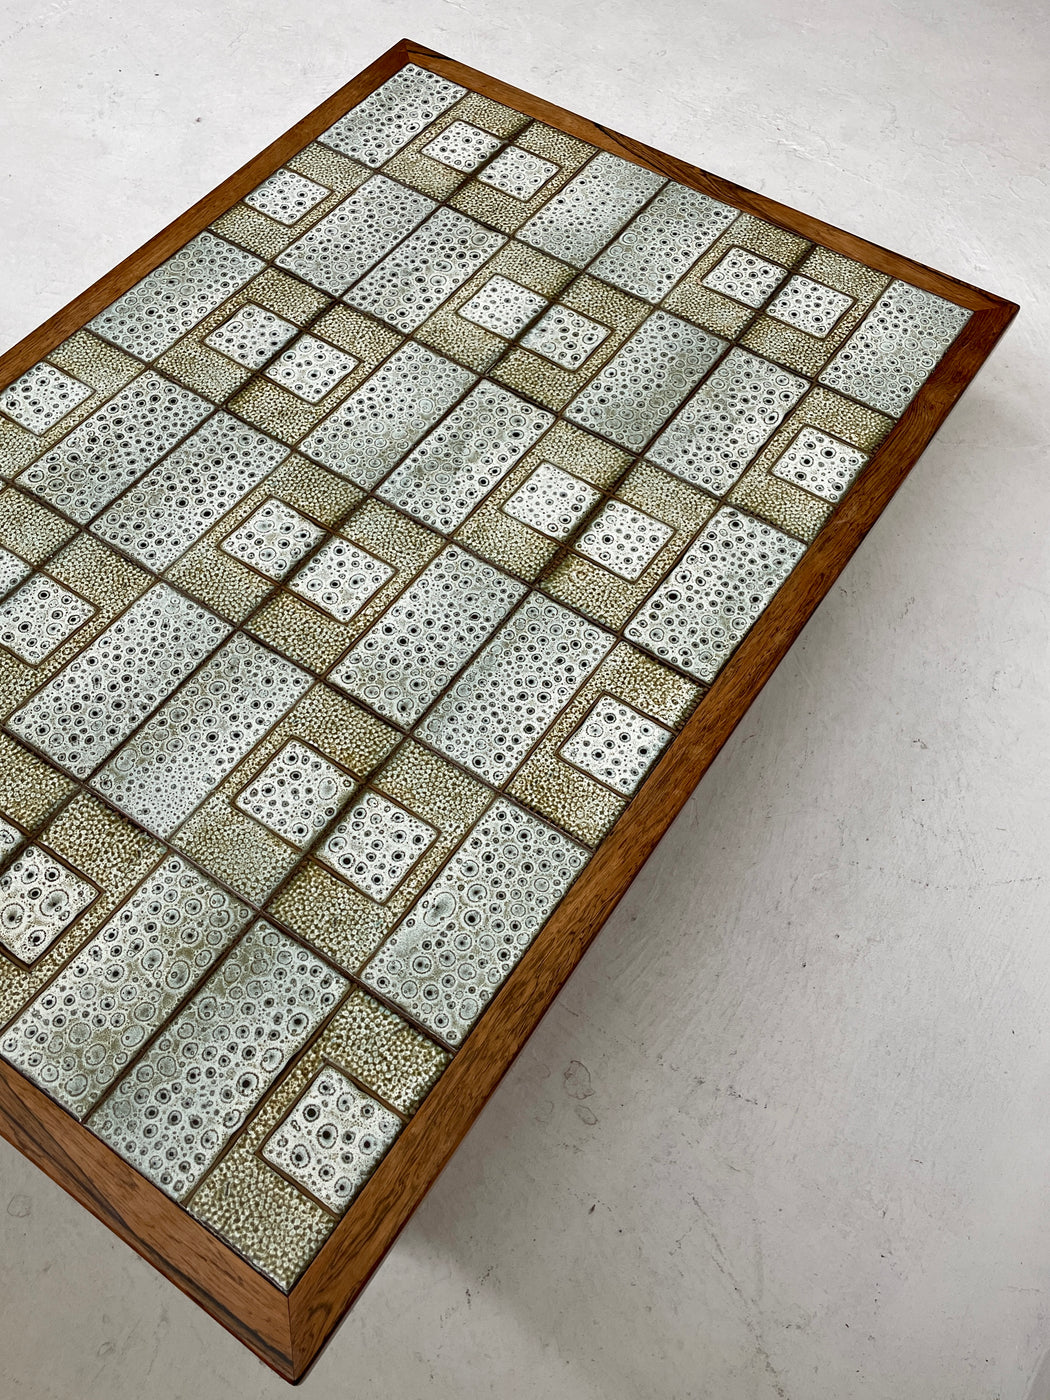 Danish Tile-topped Rosewood Coffee Table